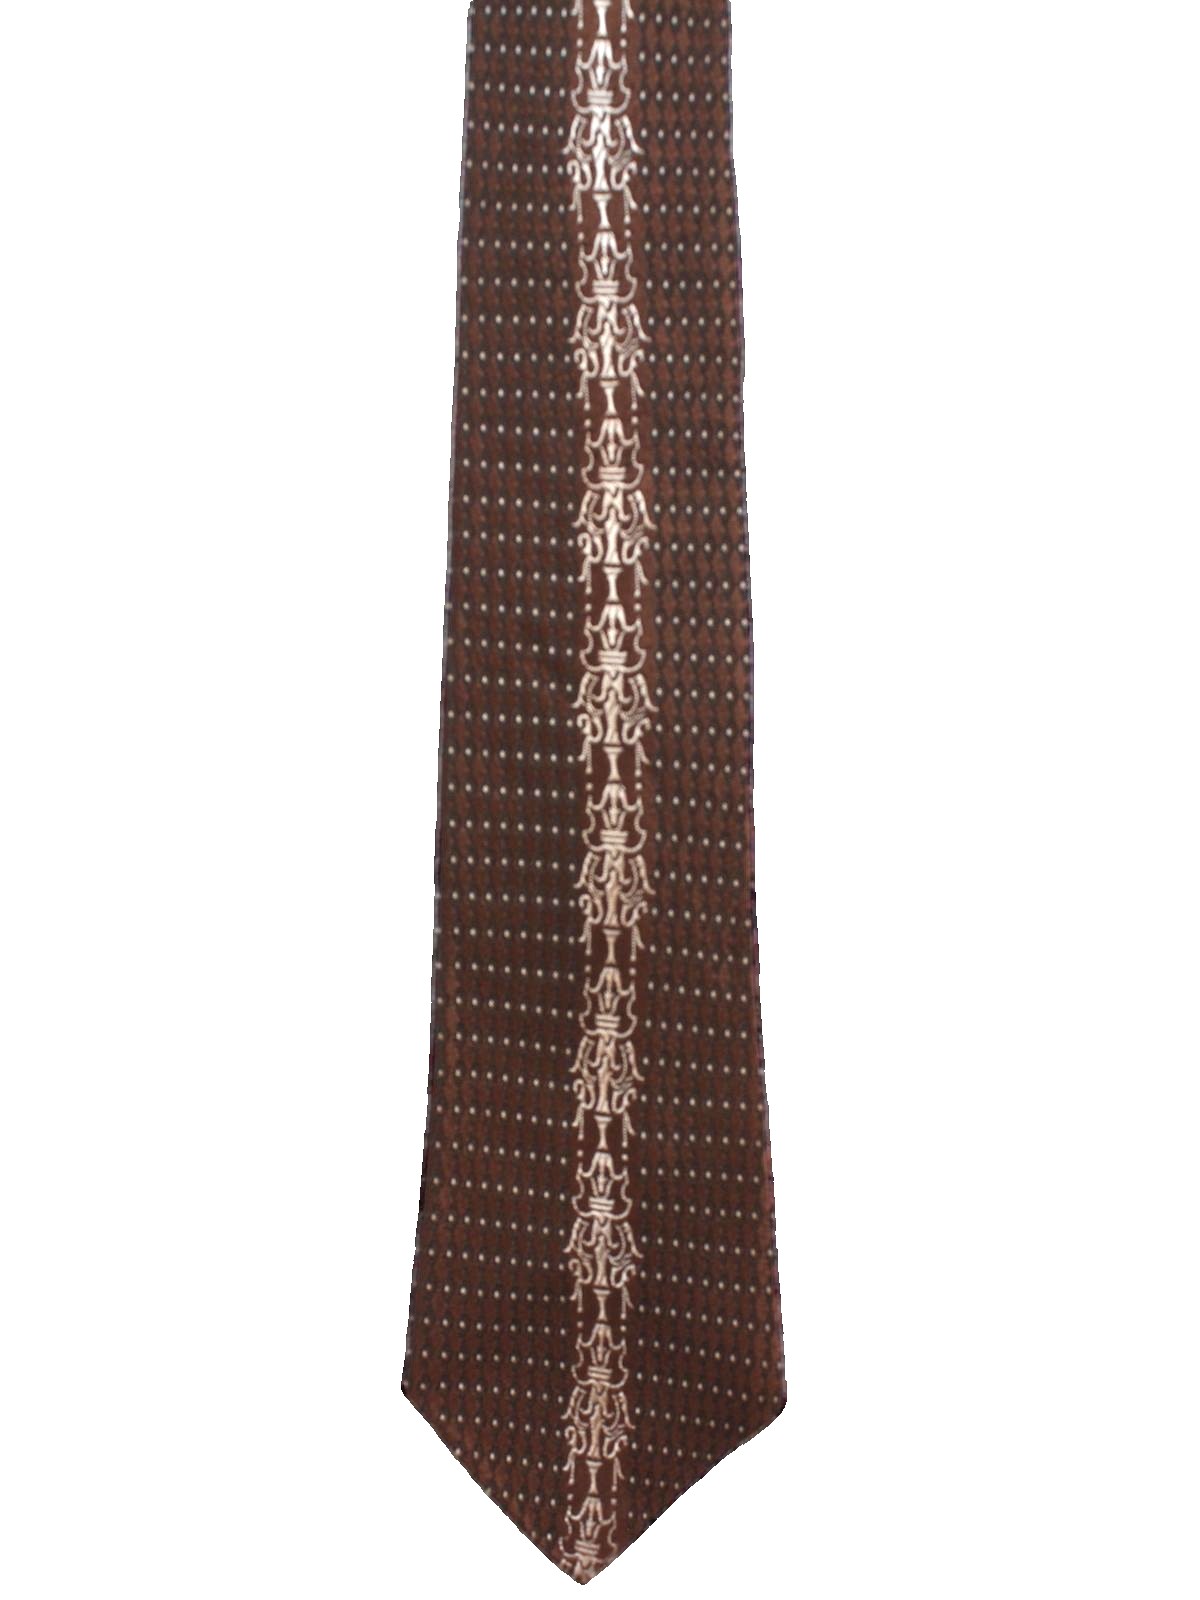 1950s Neck Tie: Late 50s -No Label- Mens dark brown background with ...